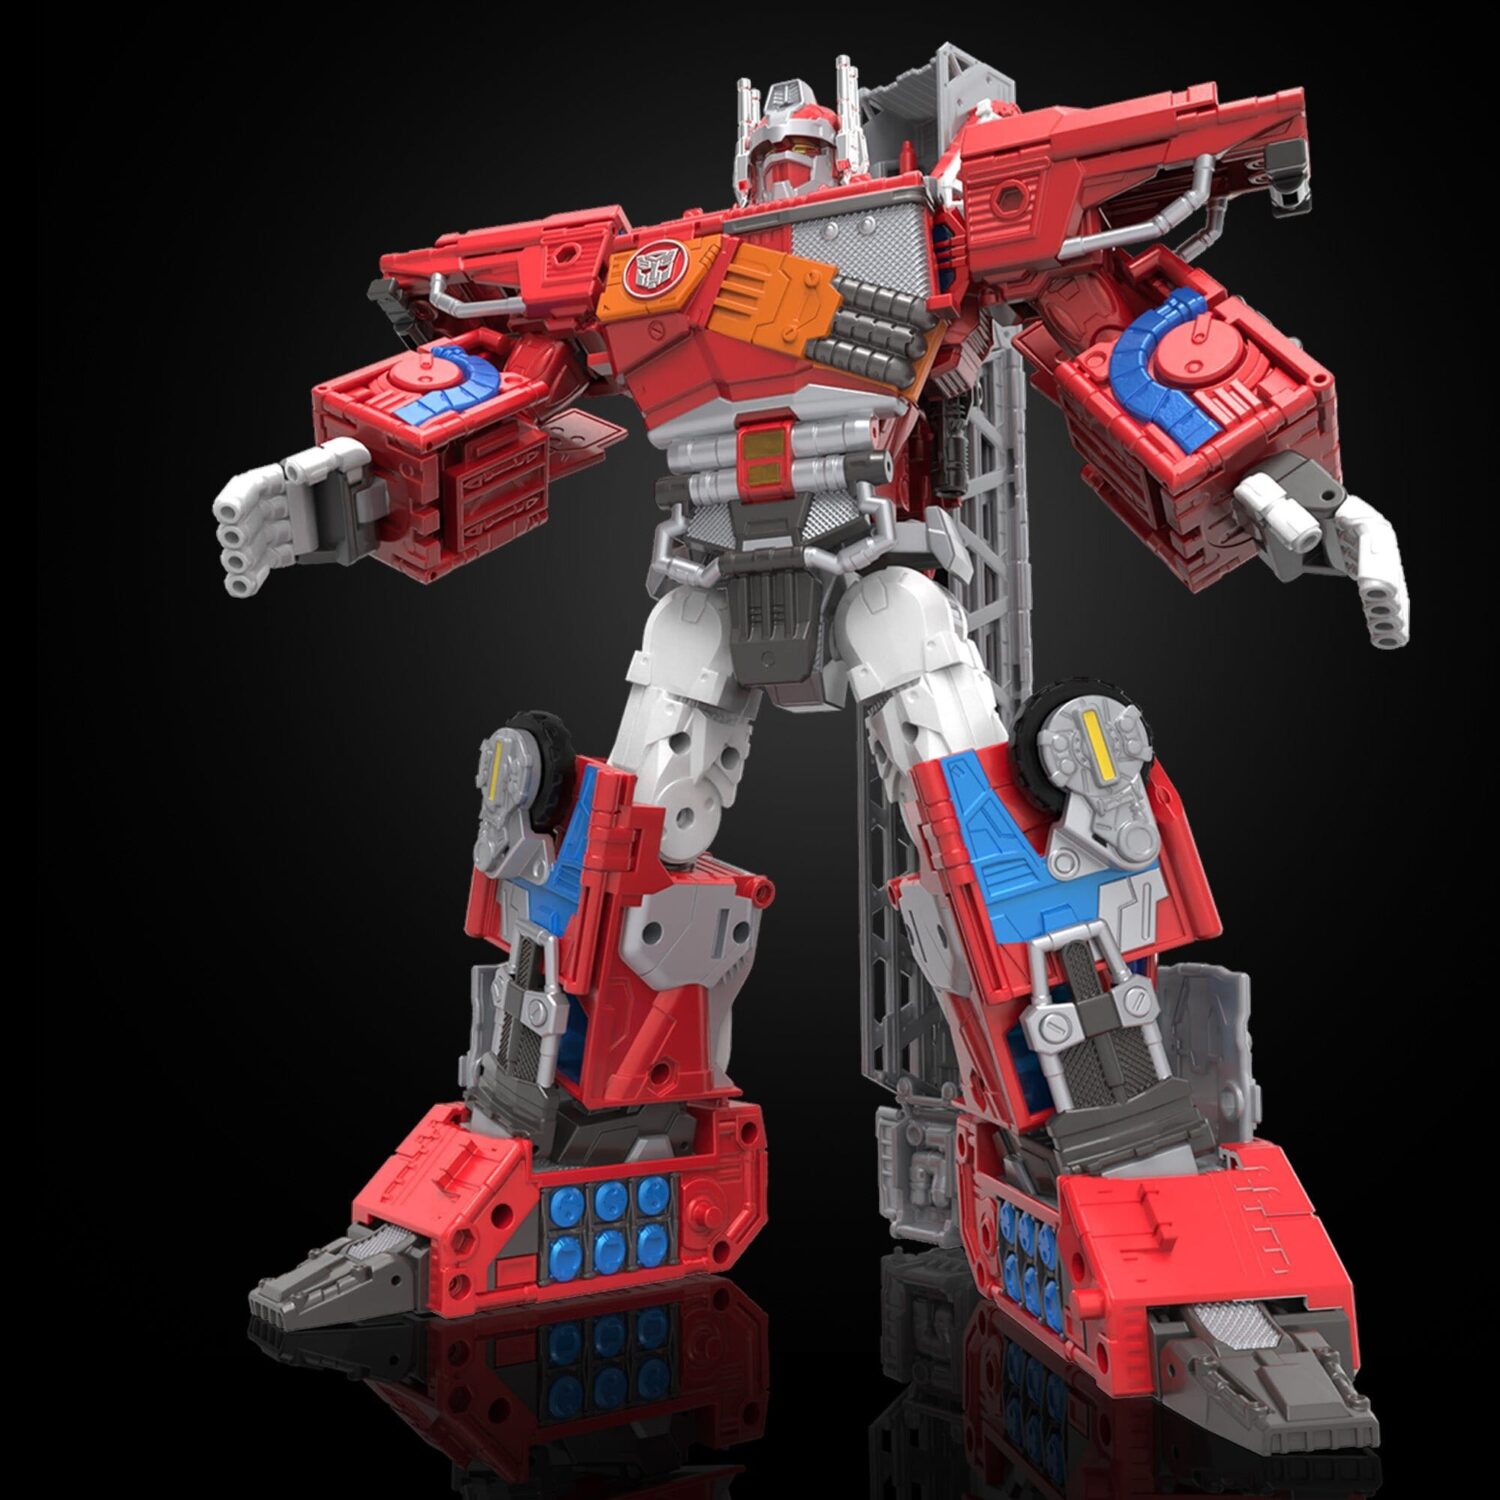 TRANSFORMERS: LEGACY - Robots in Disguise 2001 Optimus Prime (Super Mode)